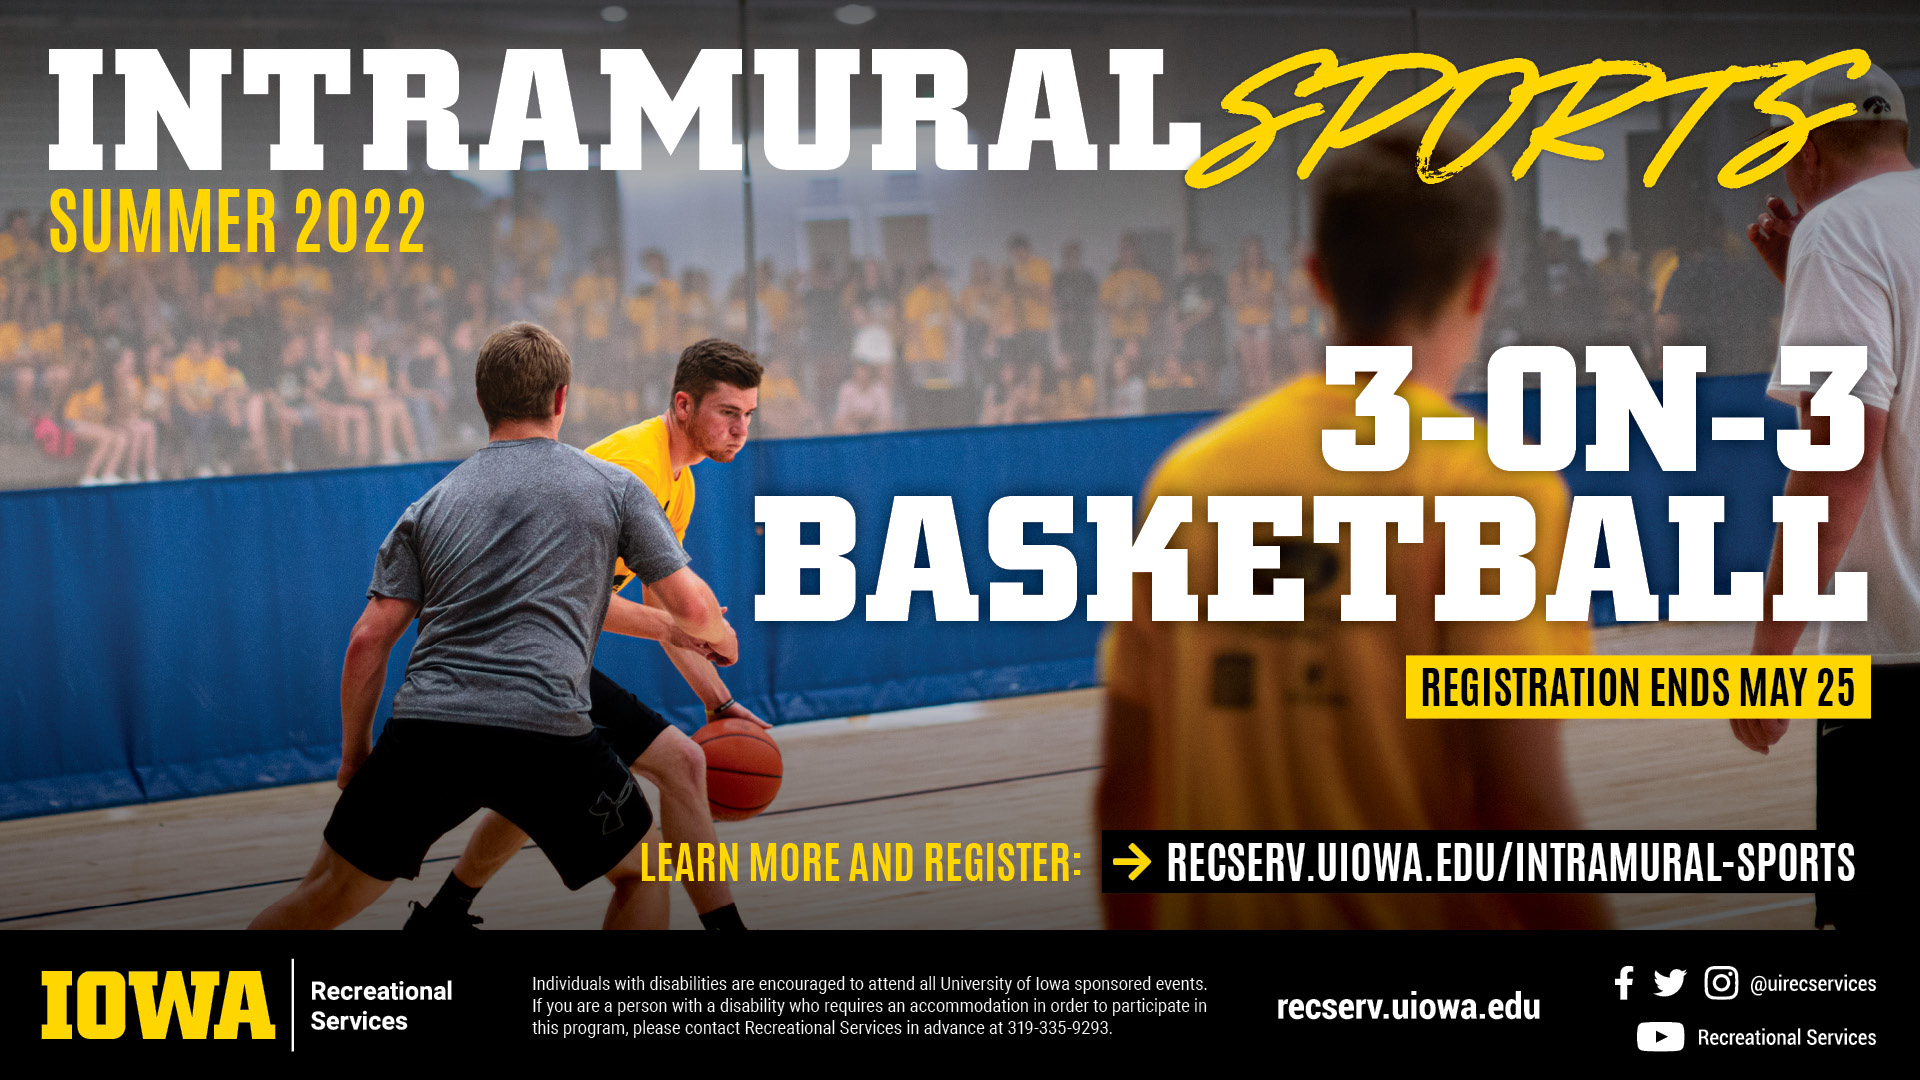 Summer 2022 Intramural Sports 3 on 3 Basketball. Registration ends May 25. Learn more and register: recserv.uiowa.edu/intramural-sports